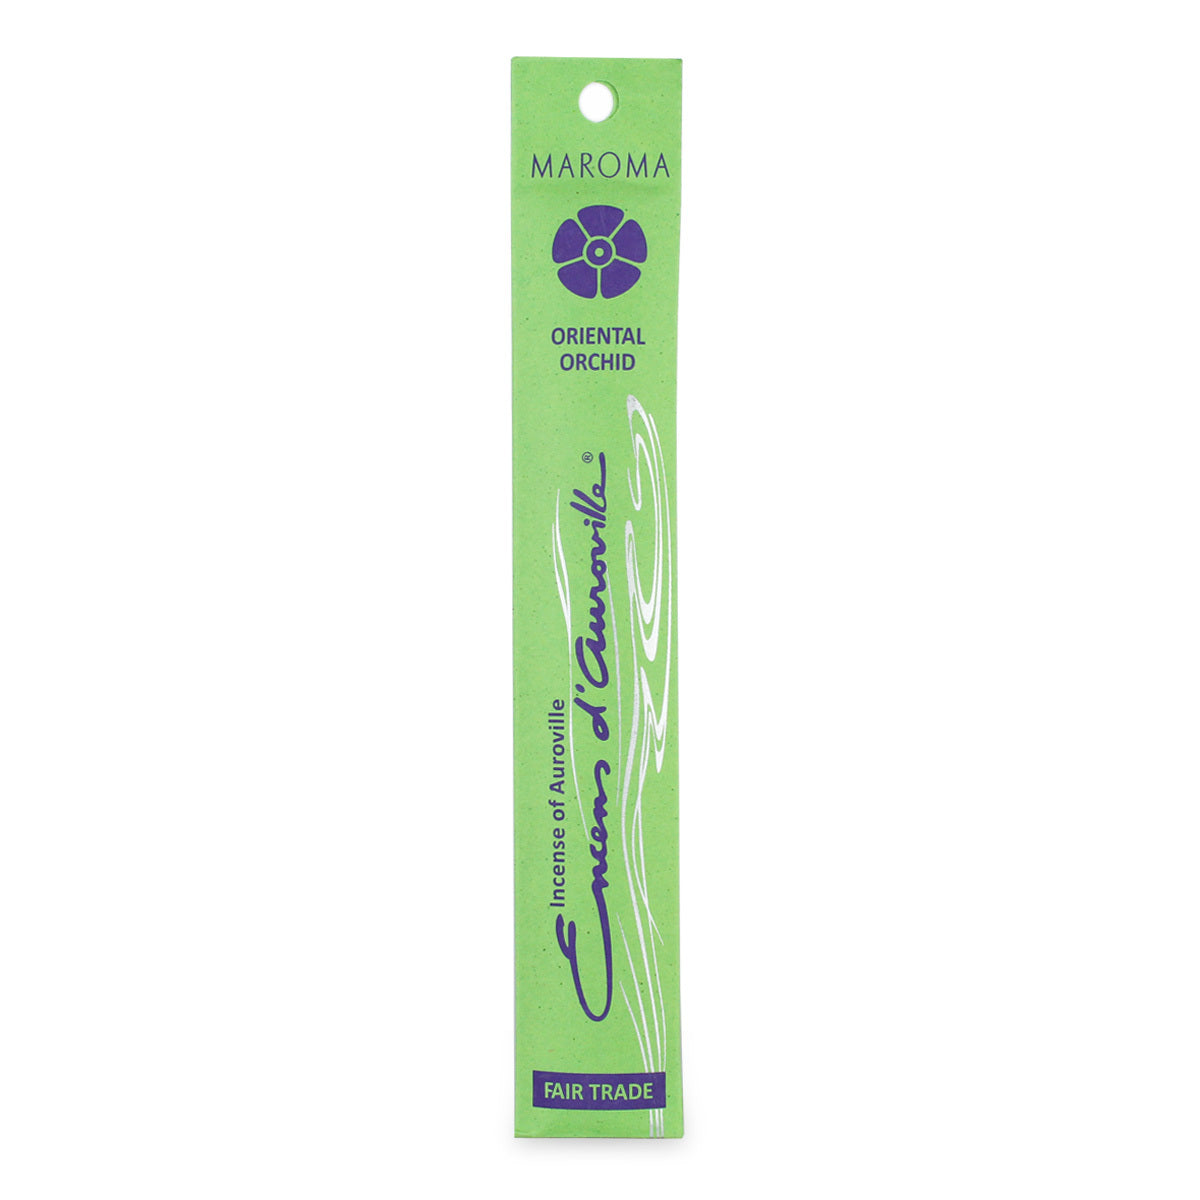 Primary image of Oriental Orchid Incense